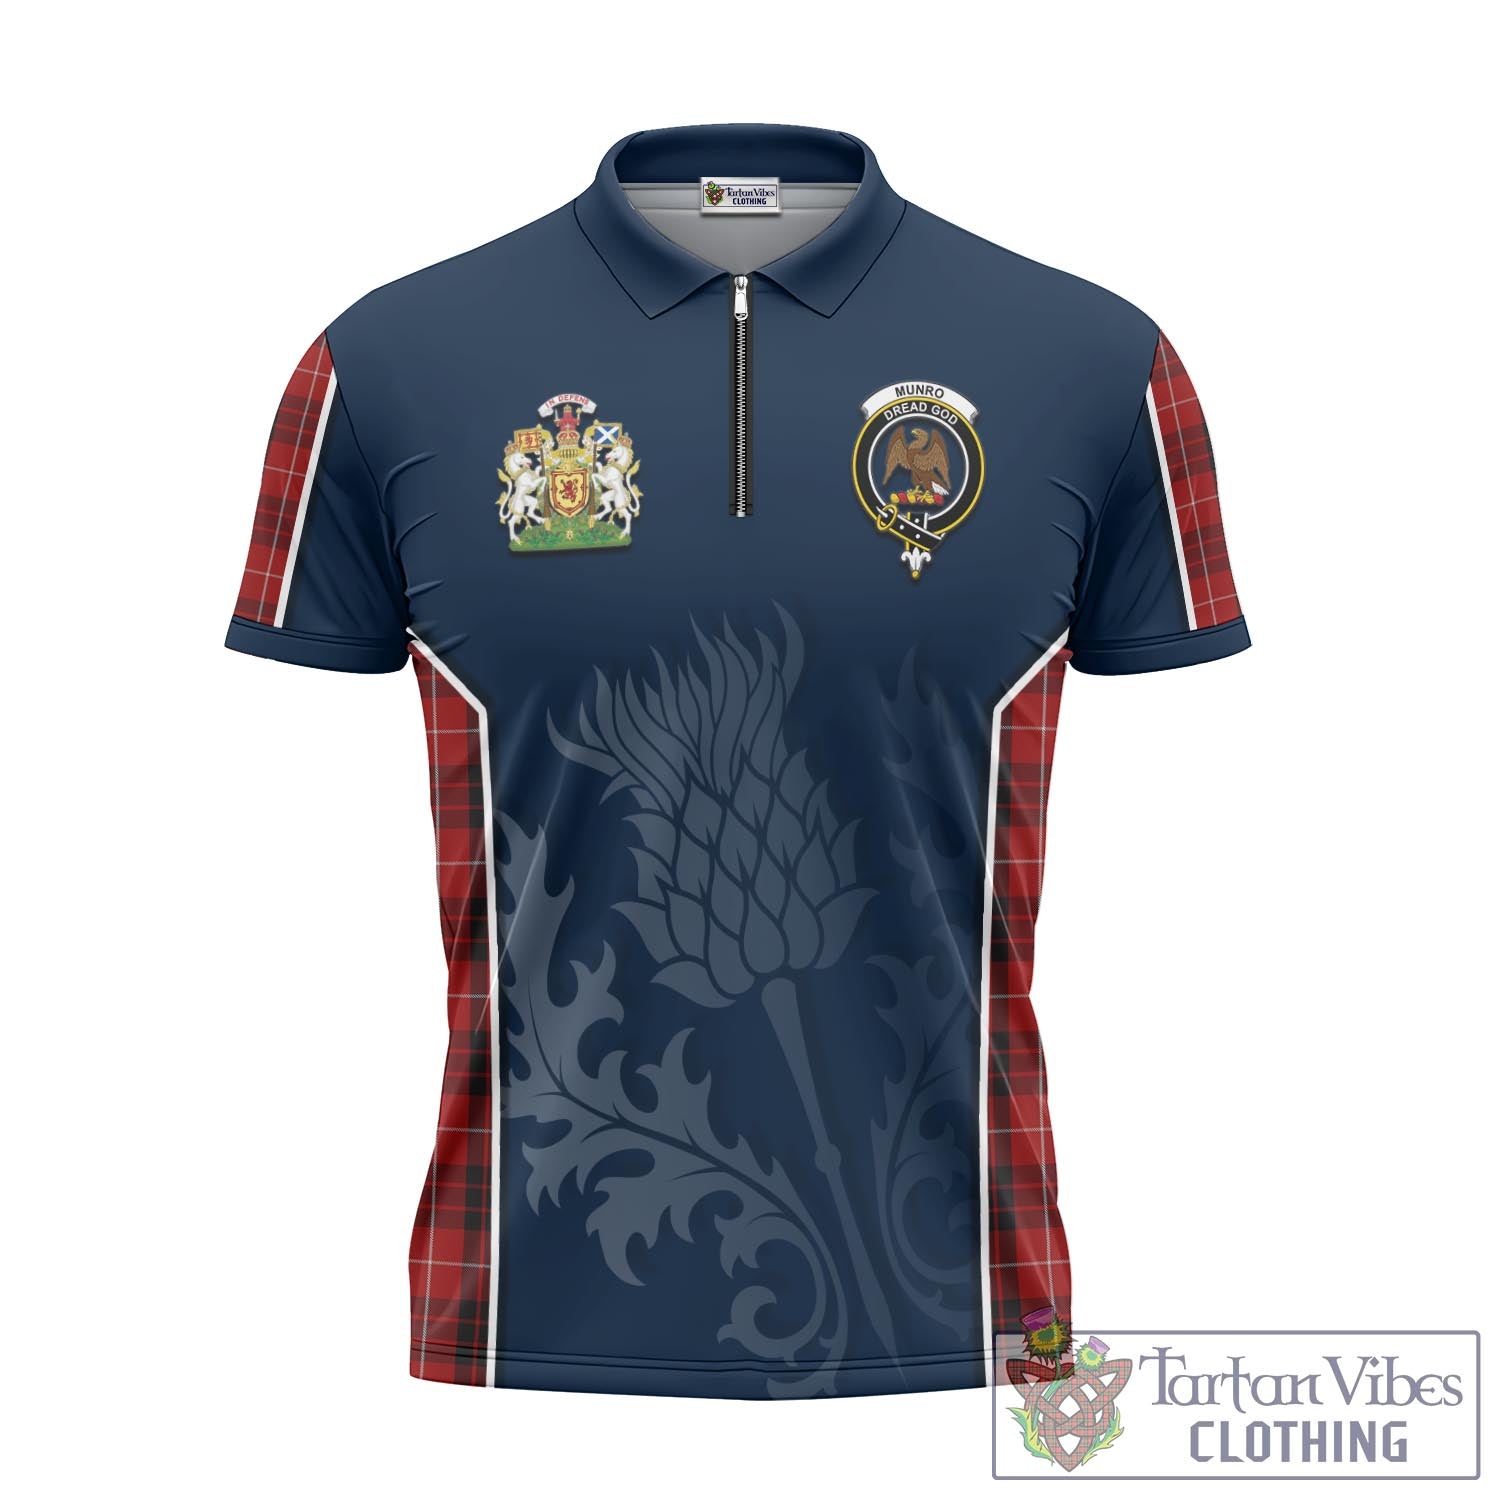 Tartan Vibes Clothing Munro Black and Red Tartan Zipper Polo Shirt with Family Crest and Scottish Thistle Vibes Sport Style